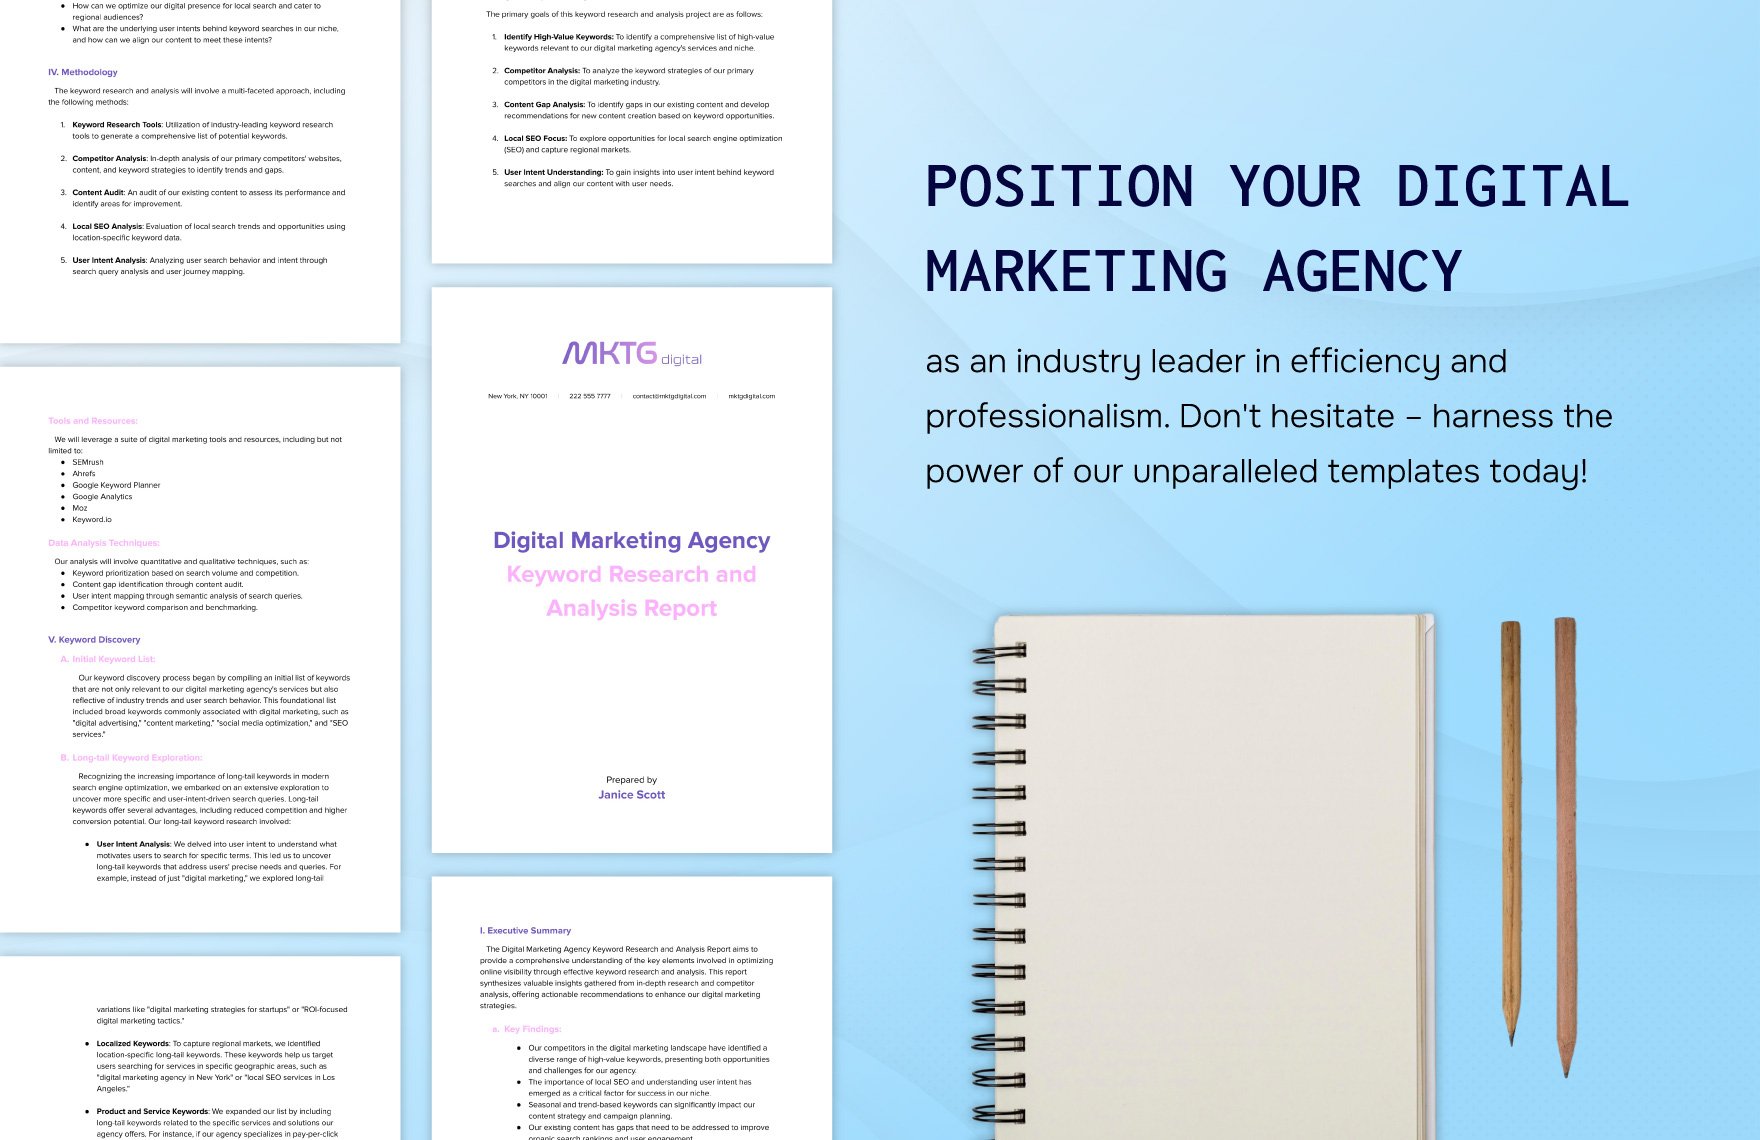 Digital Marketing Agency Keyword Research and Analysis Report Template